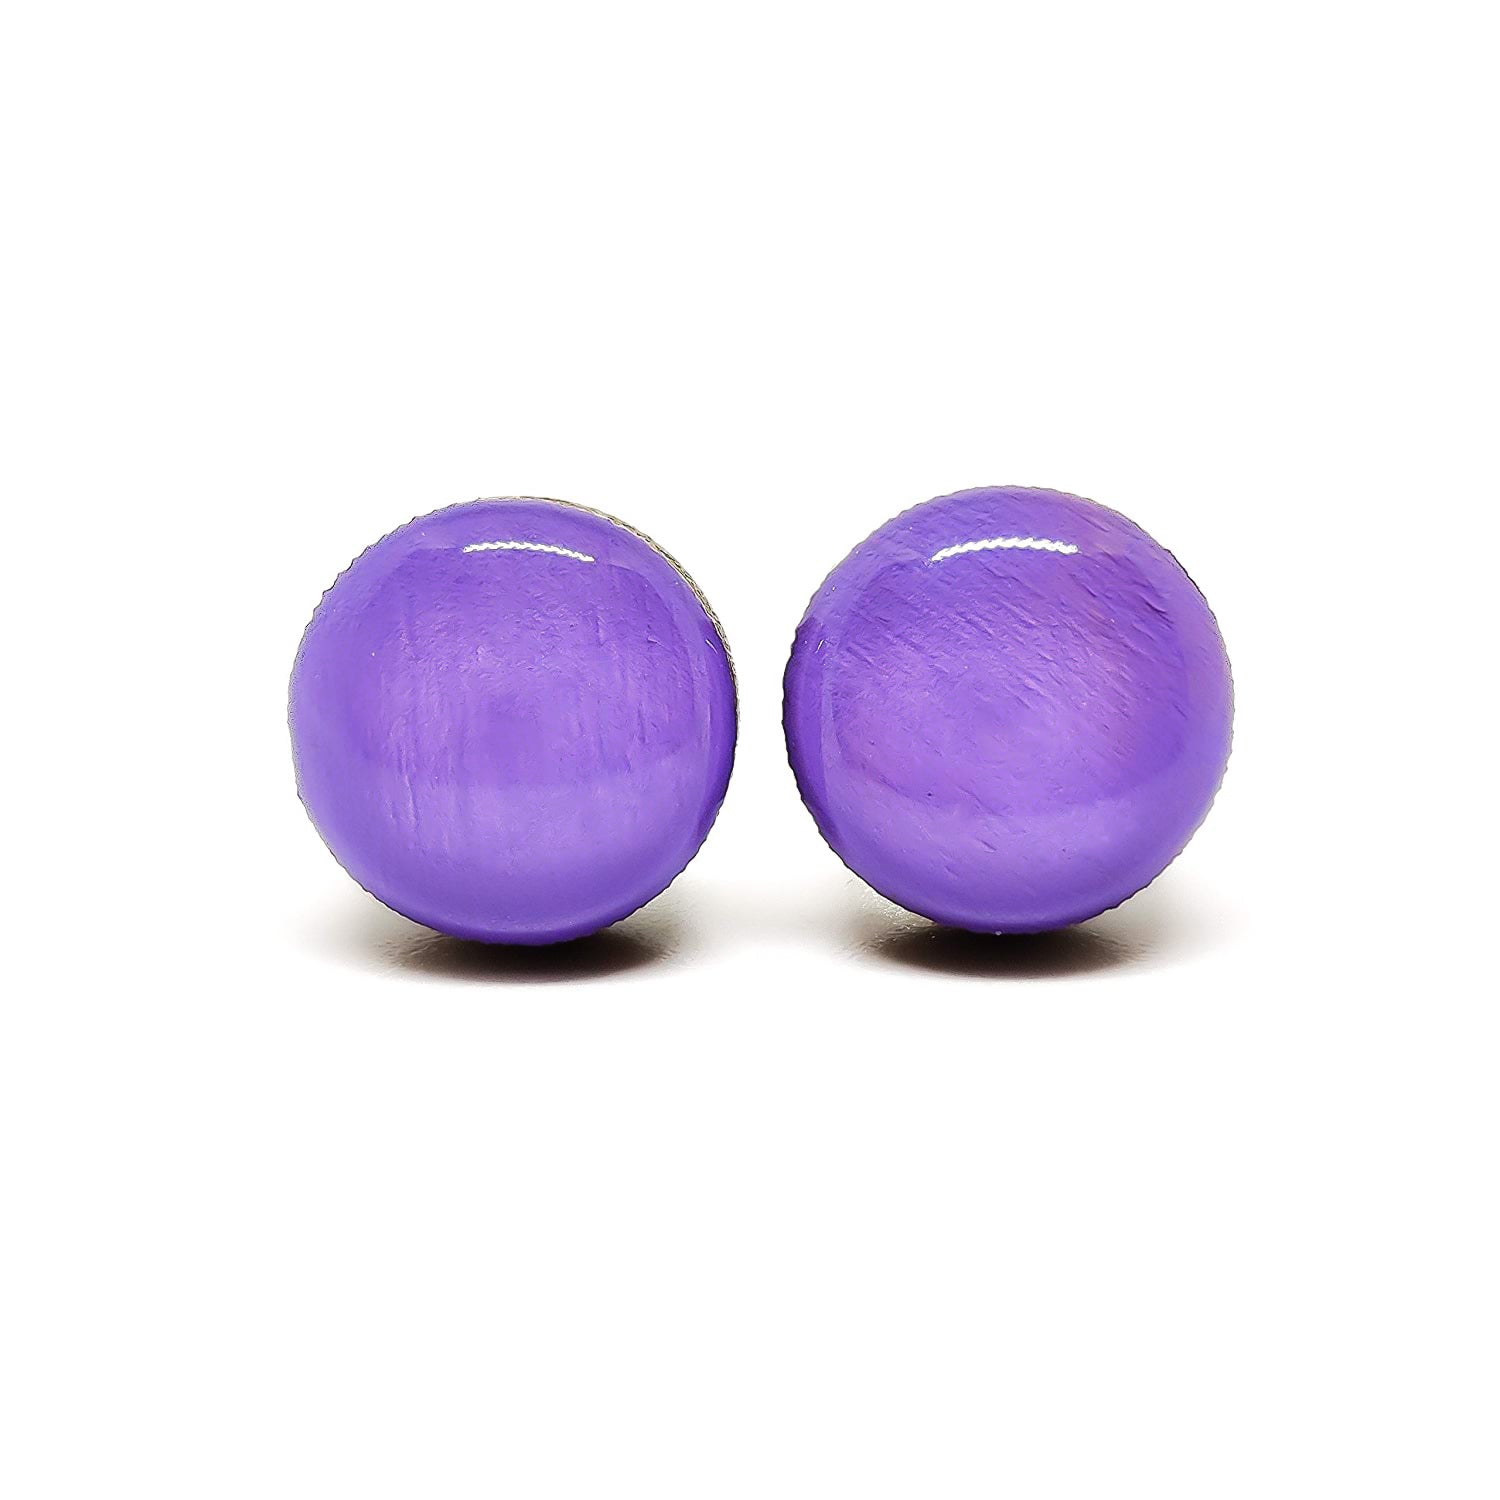 Stud Earrings, Lavender, 10 mm, Handmade, Stainless Steel Posts for Sensitive Ears - Candi Cove Designs  purple jade earrings, lavender stud earrings, lilac stud earrings, jade earrings, purple post earrings for women, lavender purple accessories jewelry, lavender earrings for women under 20, daphne earrings, lavender ball earrings, dot earrings, circle earrings, large stud earrings, button earrings, 